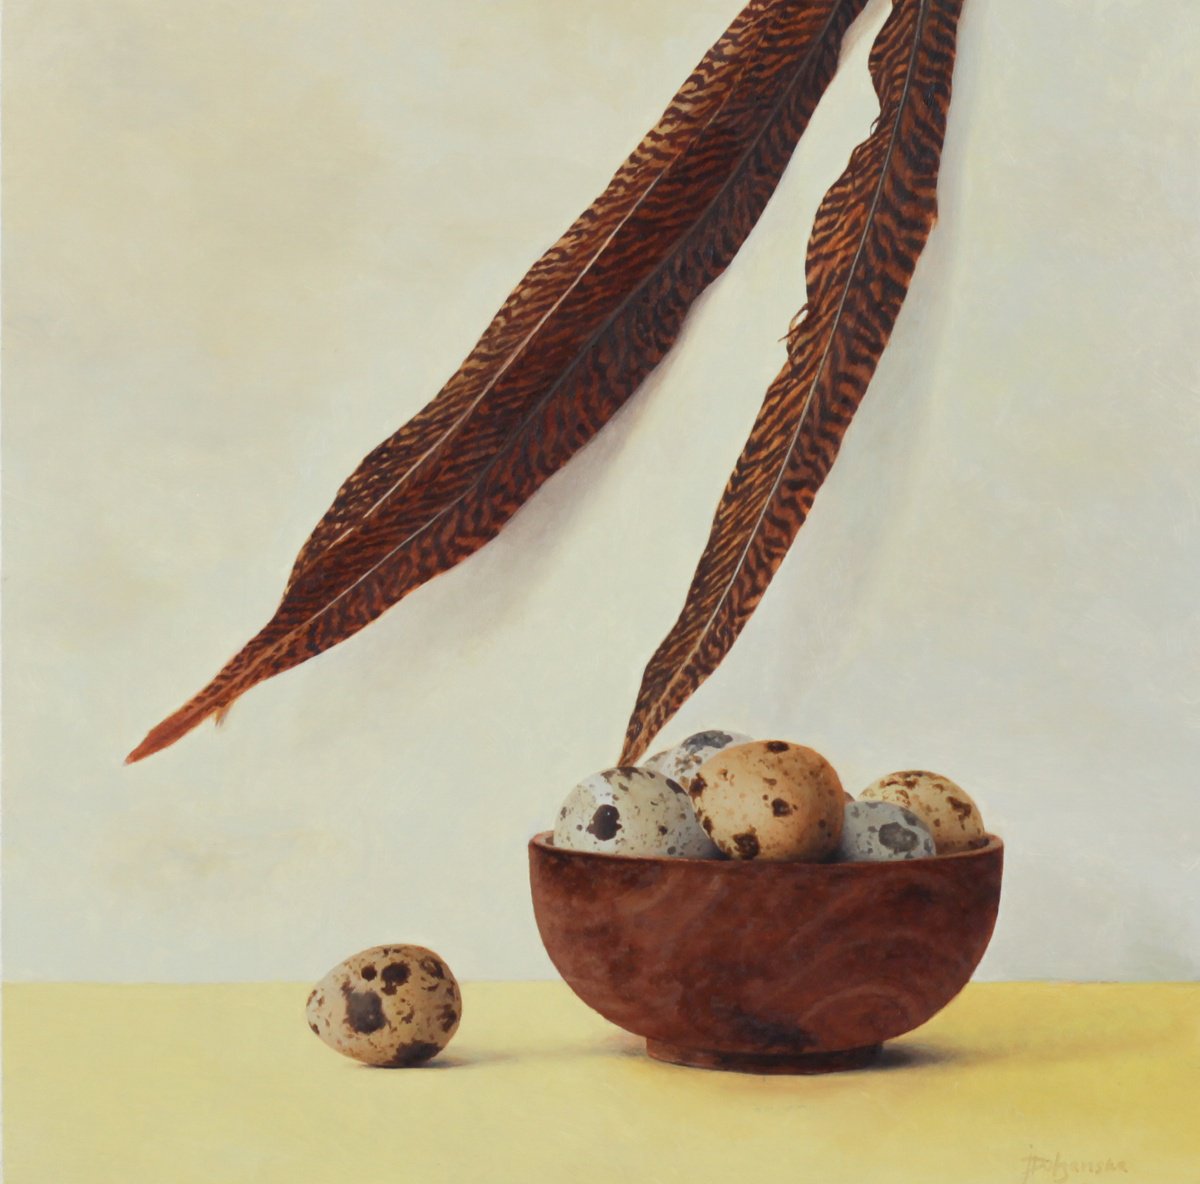 Quail Eggs with Feathers by Iryna Dolzhanska